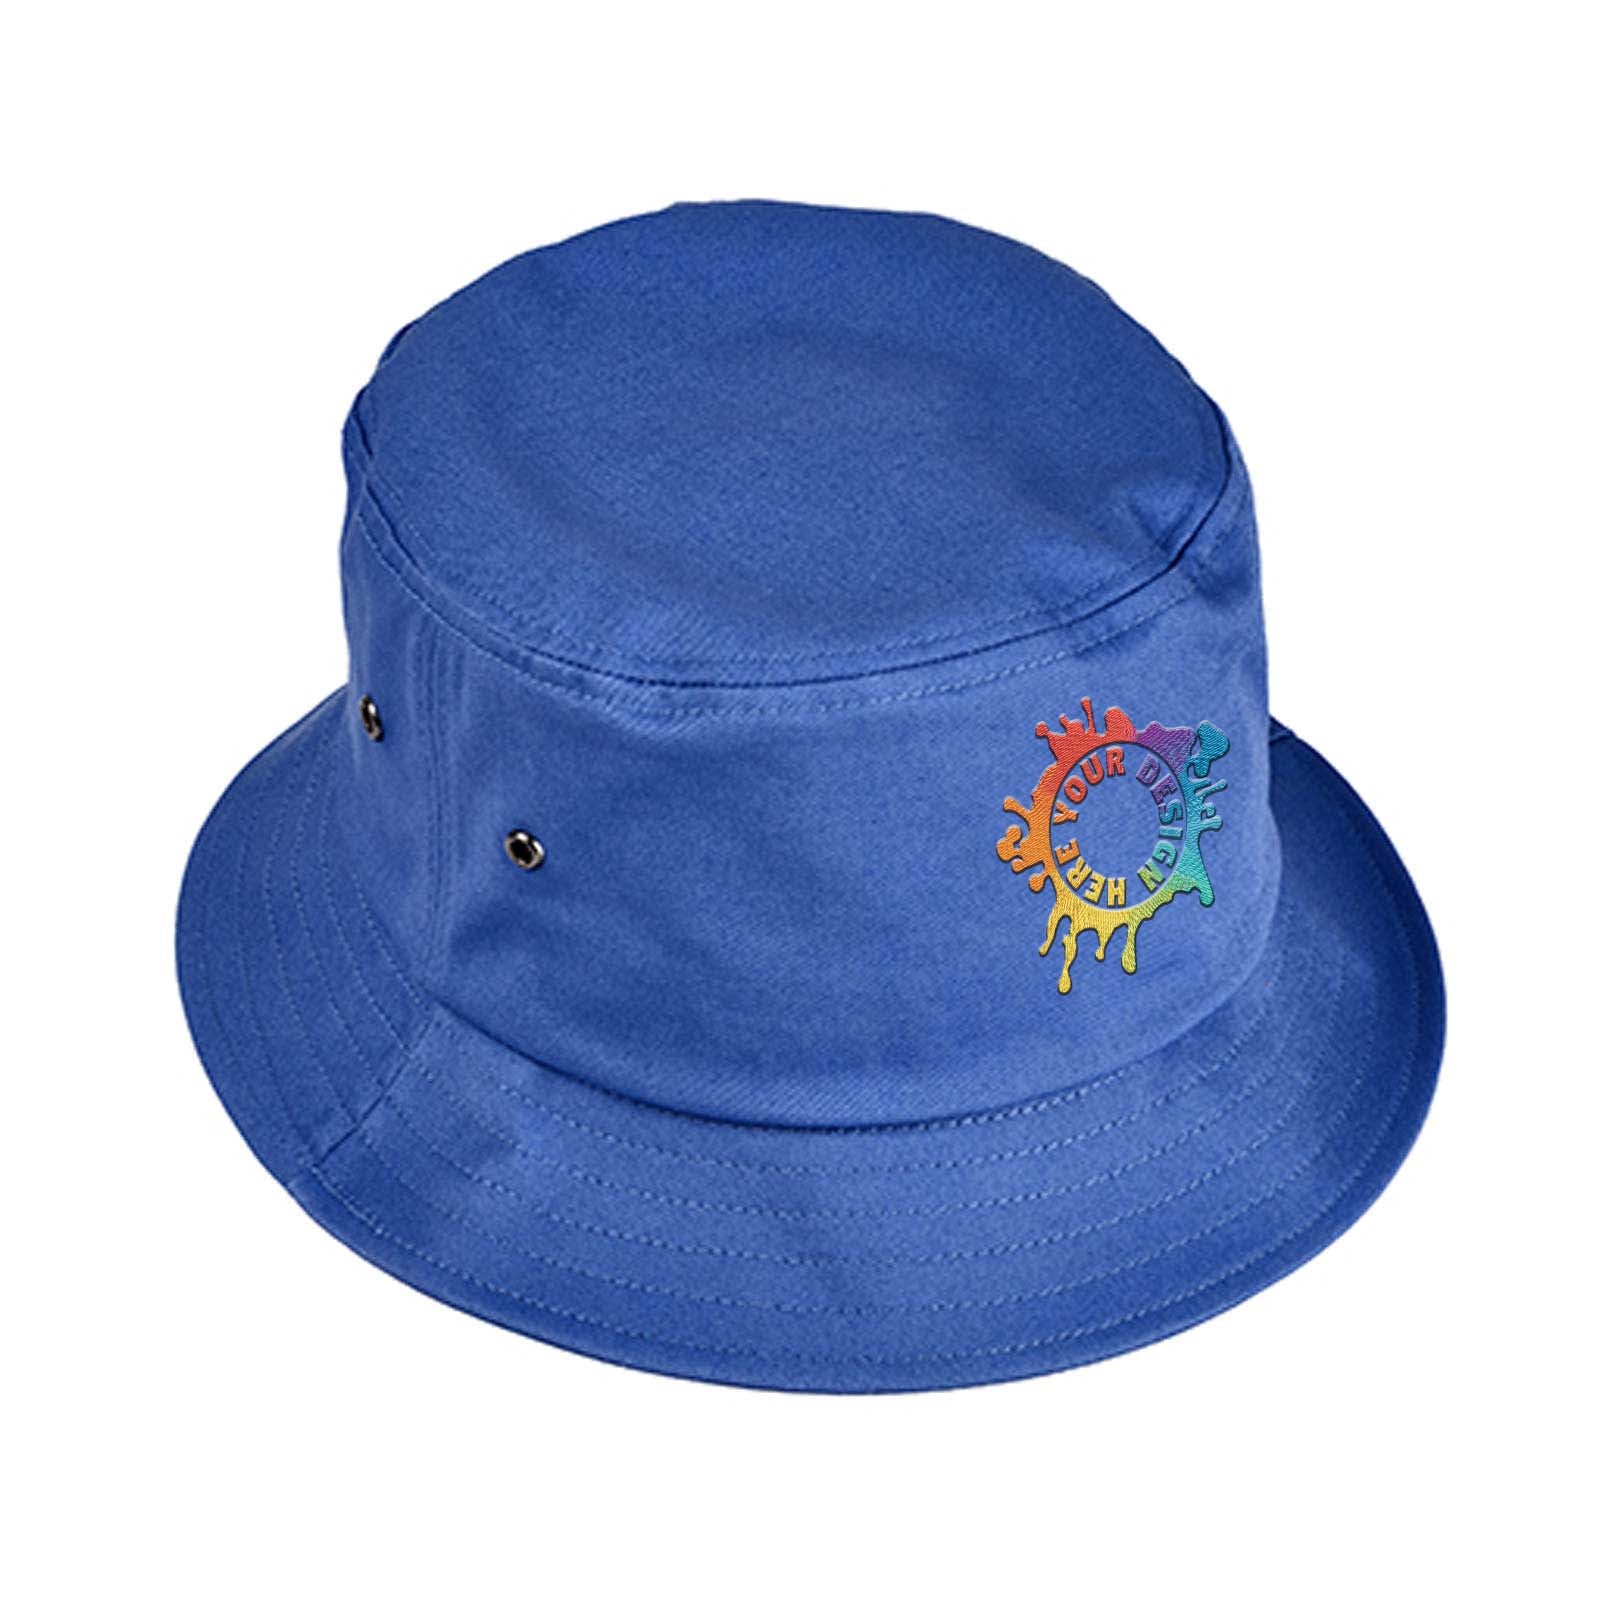 Embroidered Big Accessories Metal Eyelet Bucket Cap Sail Blue / Os